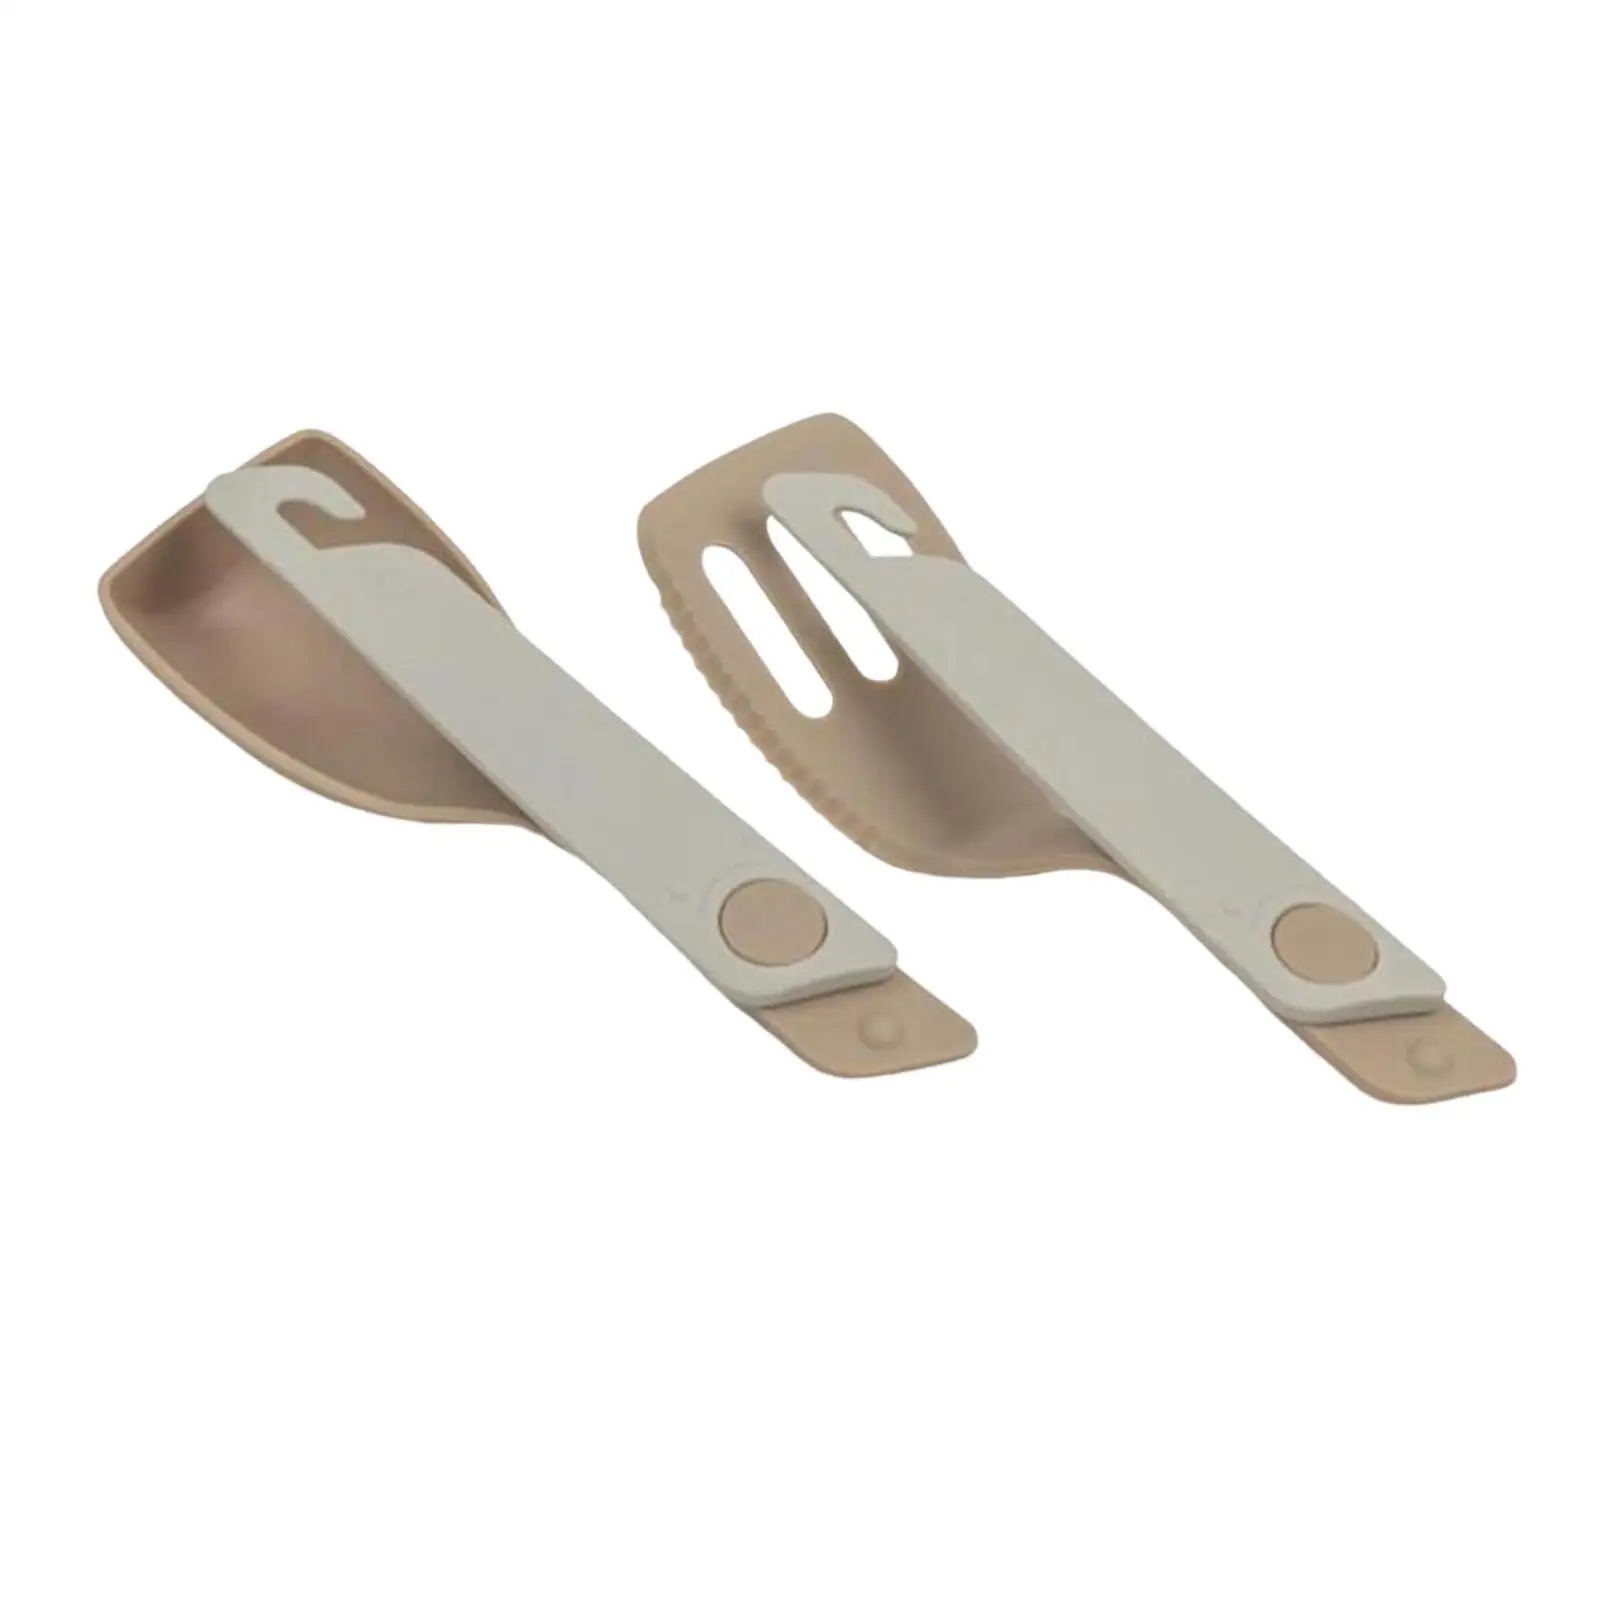 2x Camping Cooking Spoon  Folding Kitchen Utensils Gadgets Cookware Tableware